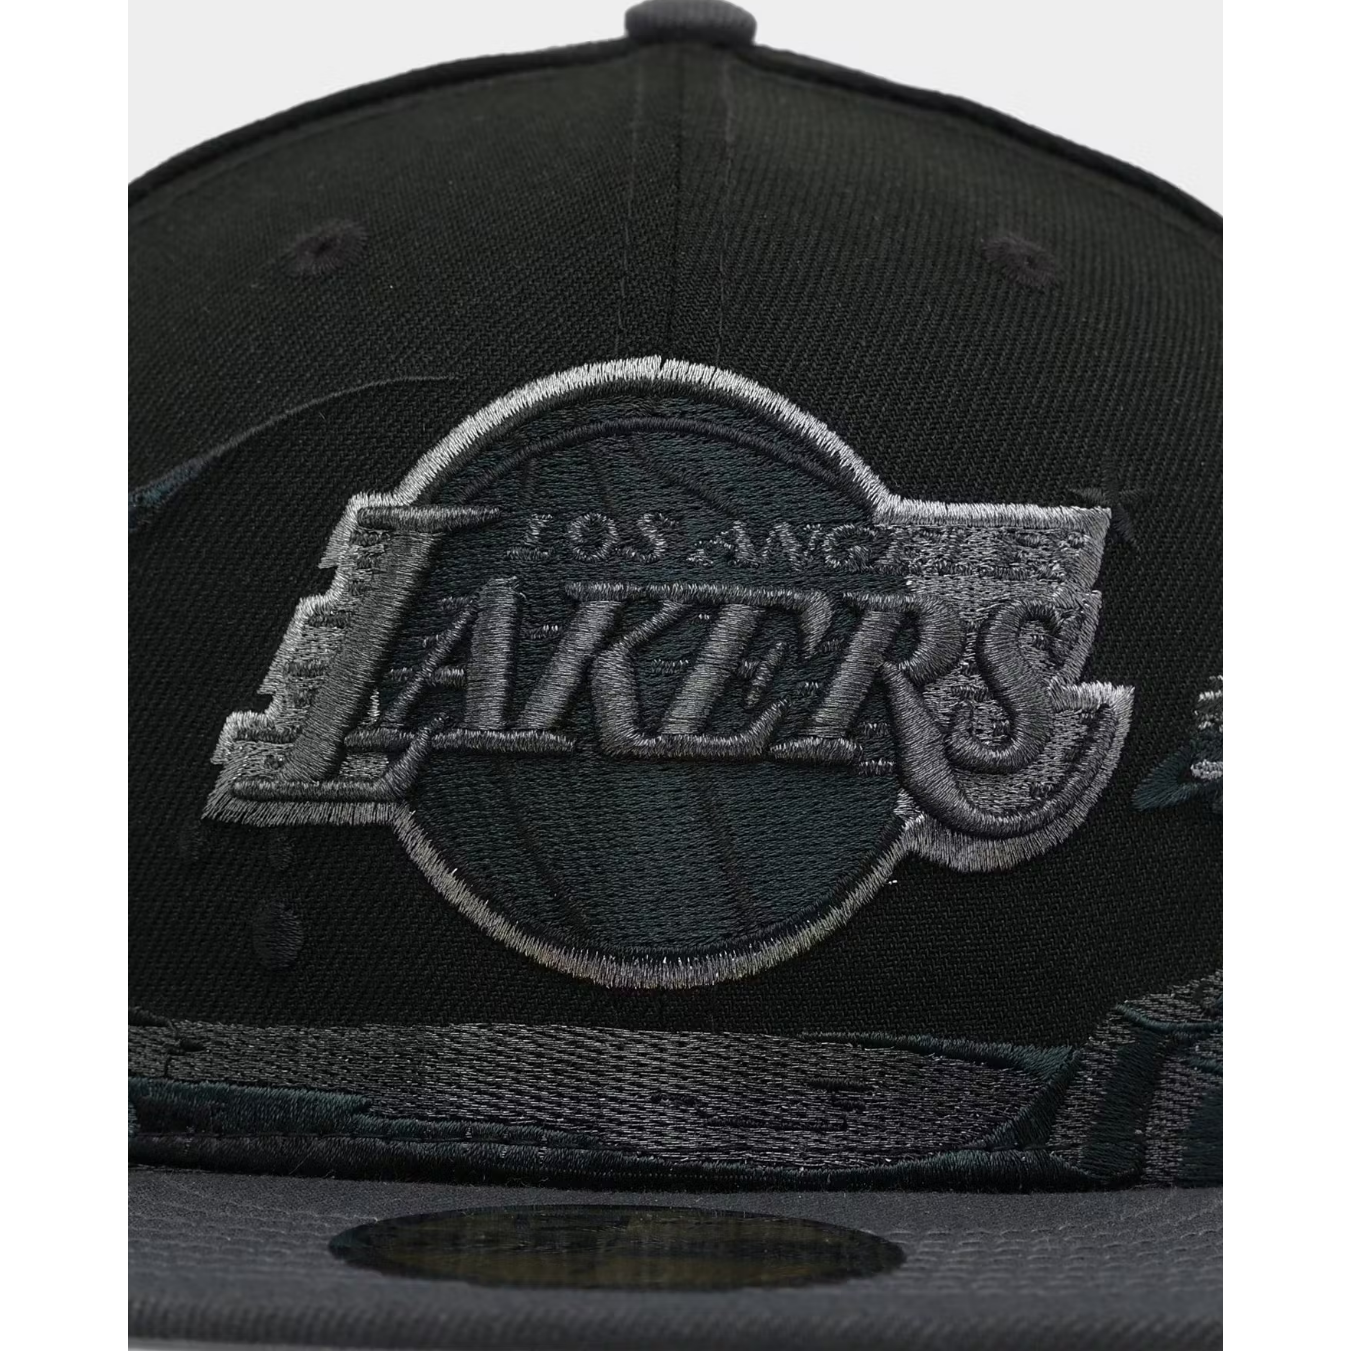 New Era - Mens Los Angeles Lakers Planetary 59FIFTY Fitted